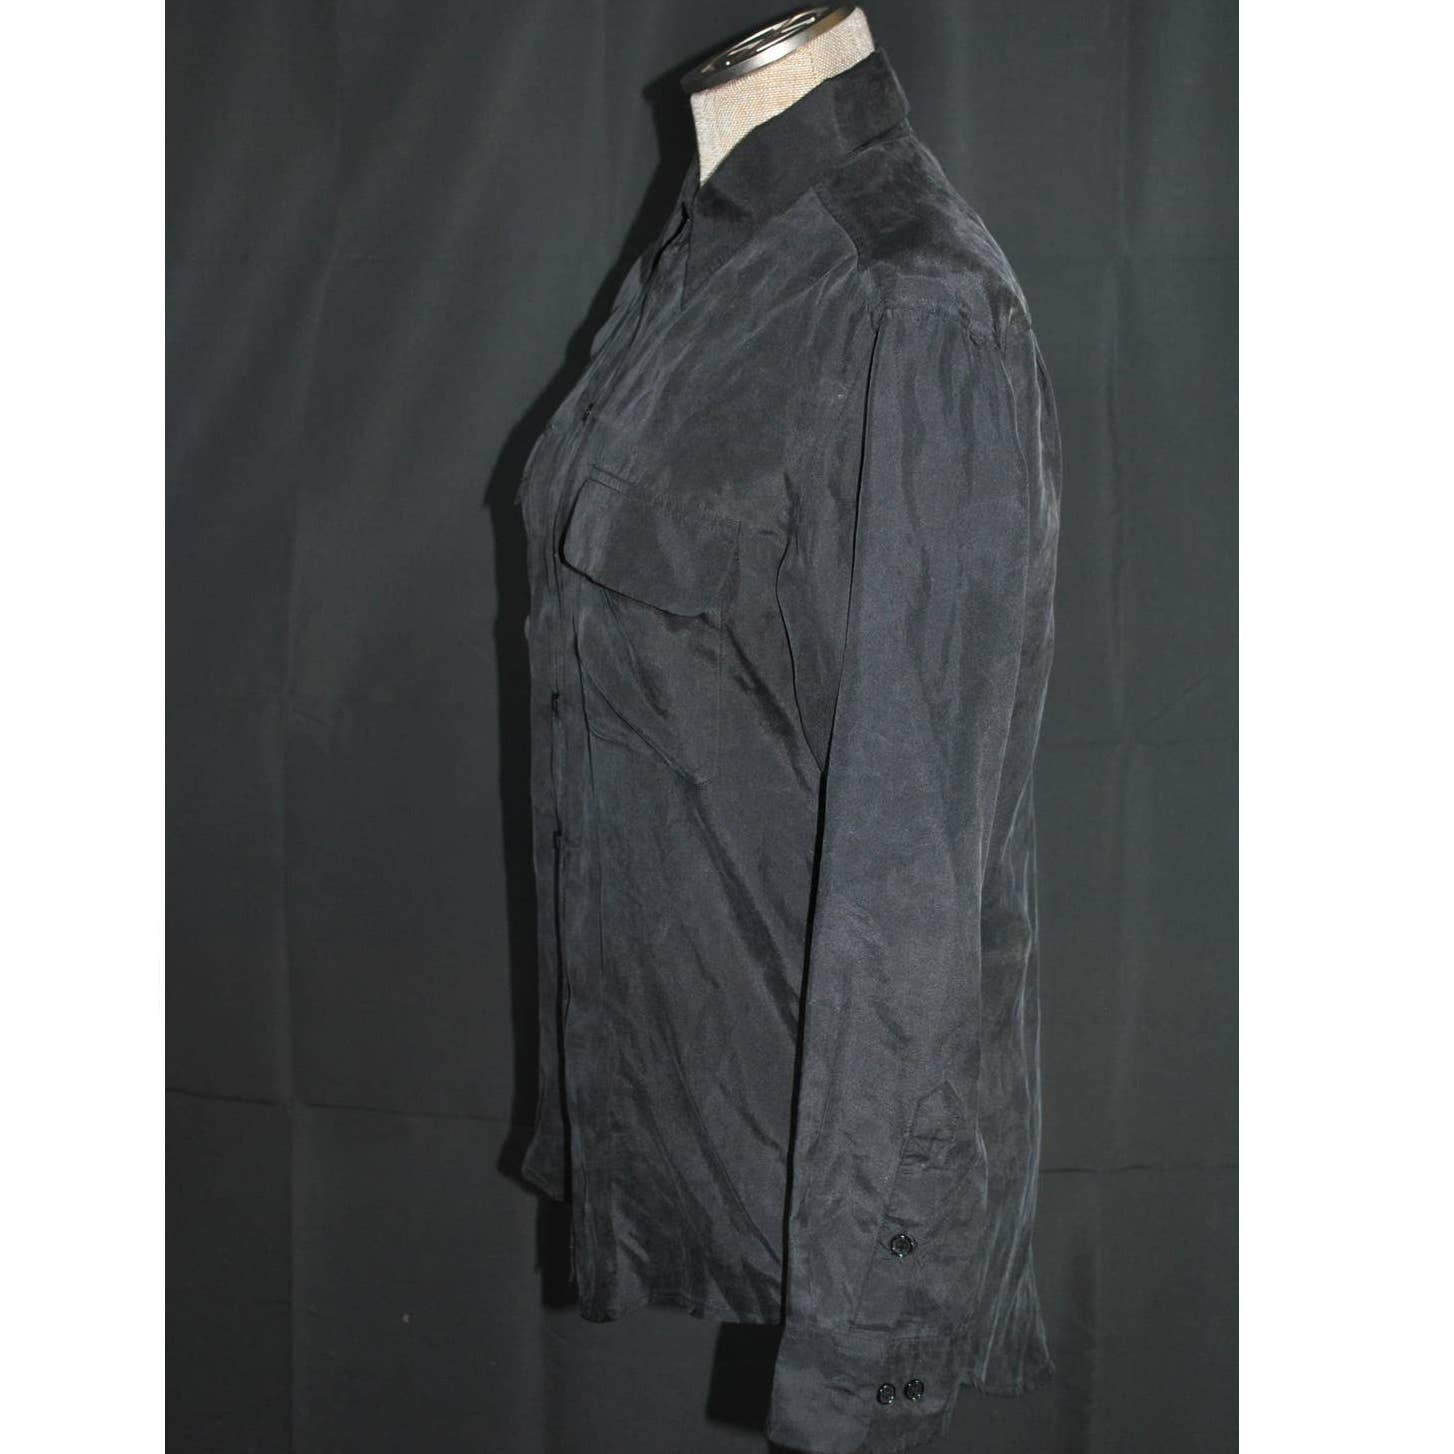 Vintage Barneys New York Black Washed Silk Button Up Top - XS